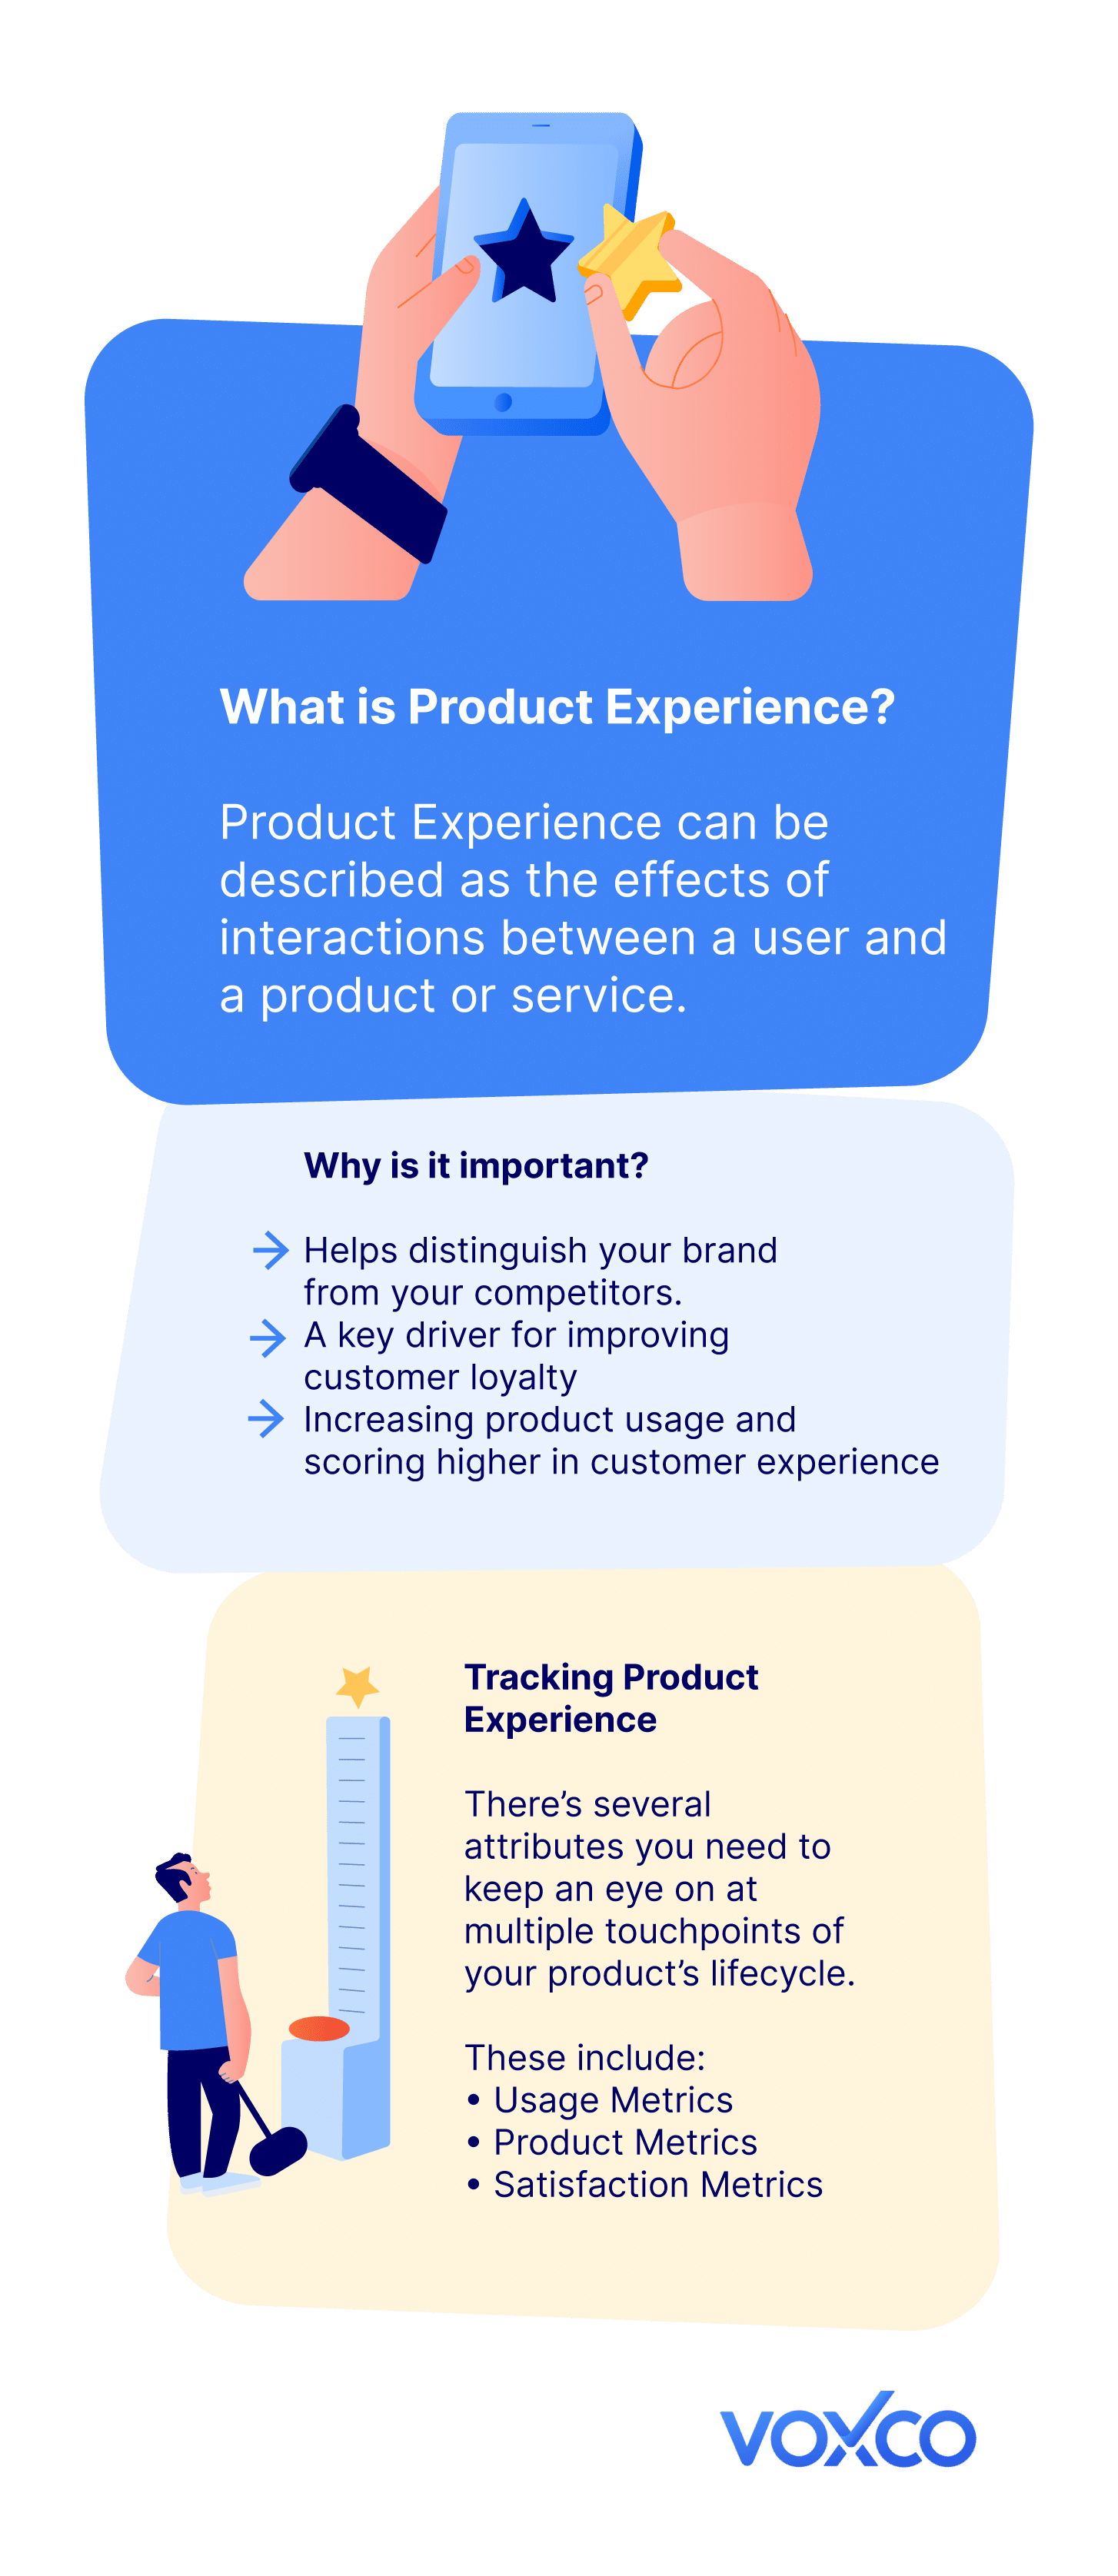 How to create a cohesive Product Experience management program 02